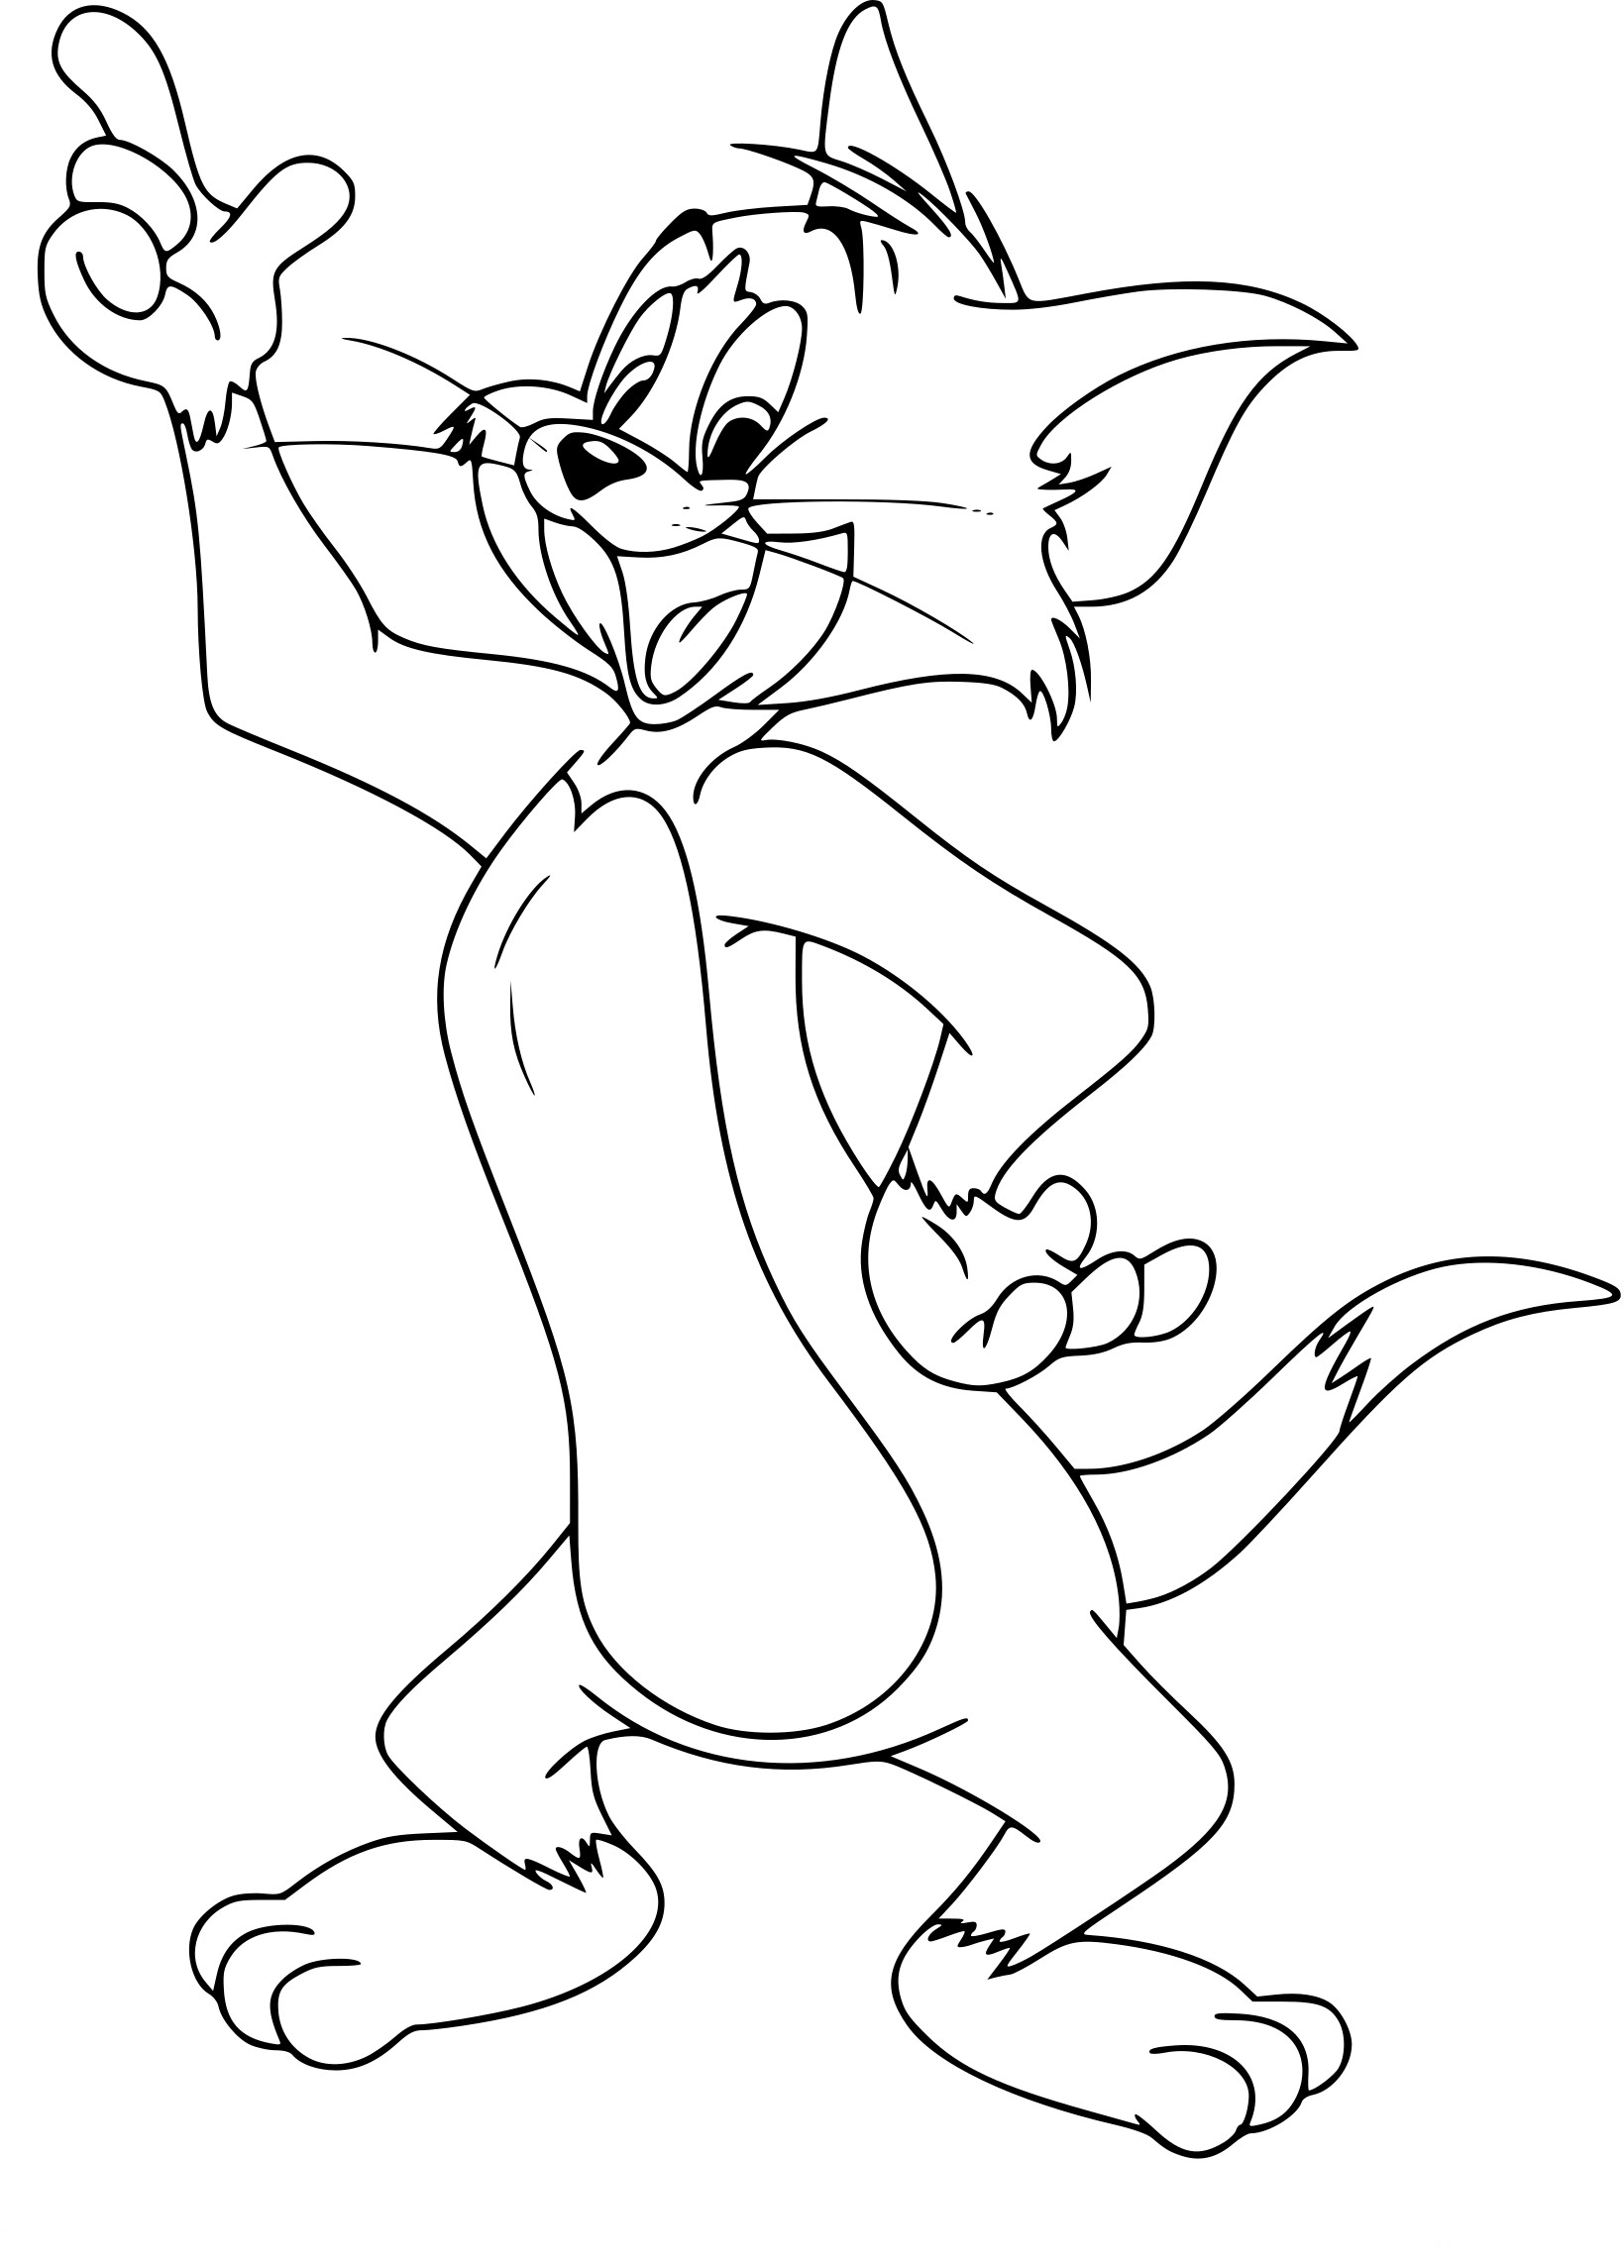 Tom The Cat coloring page